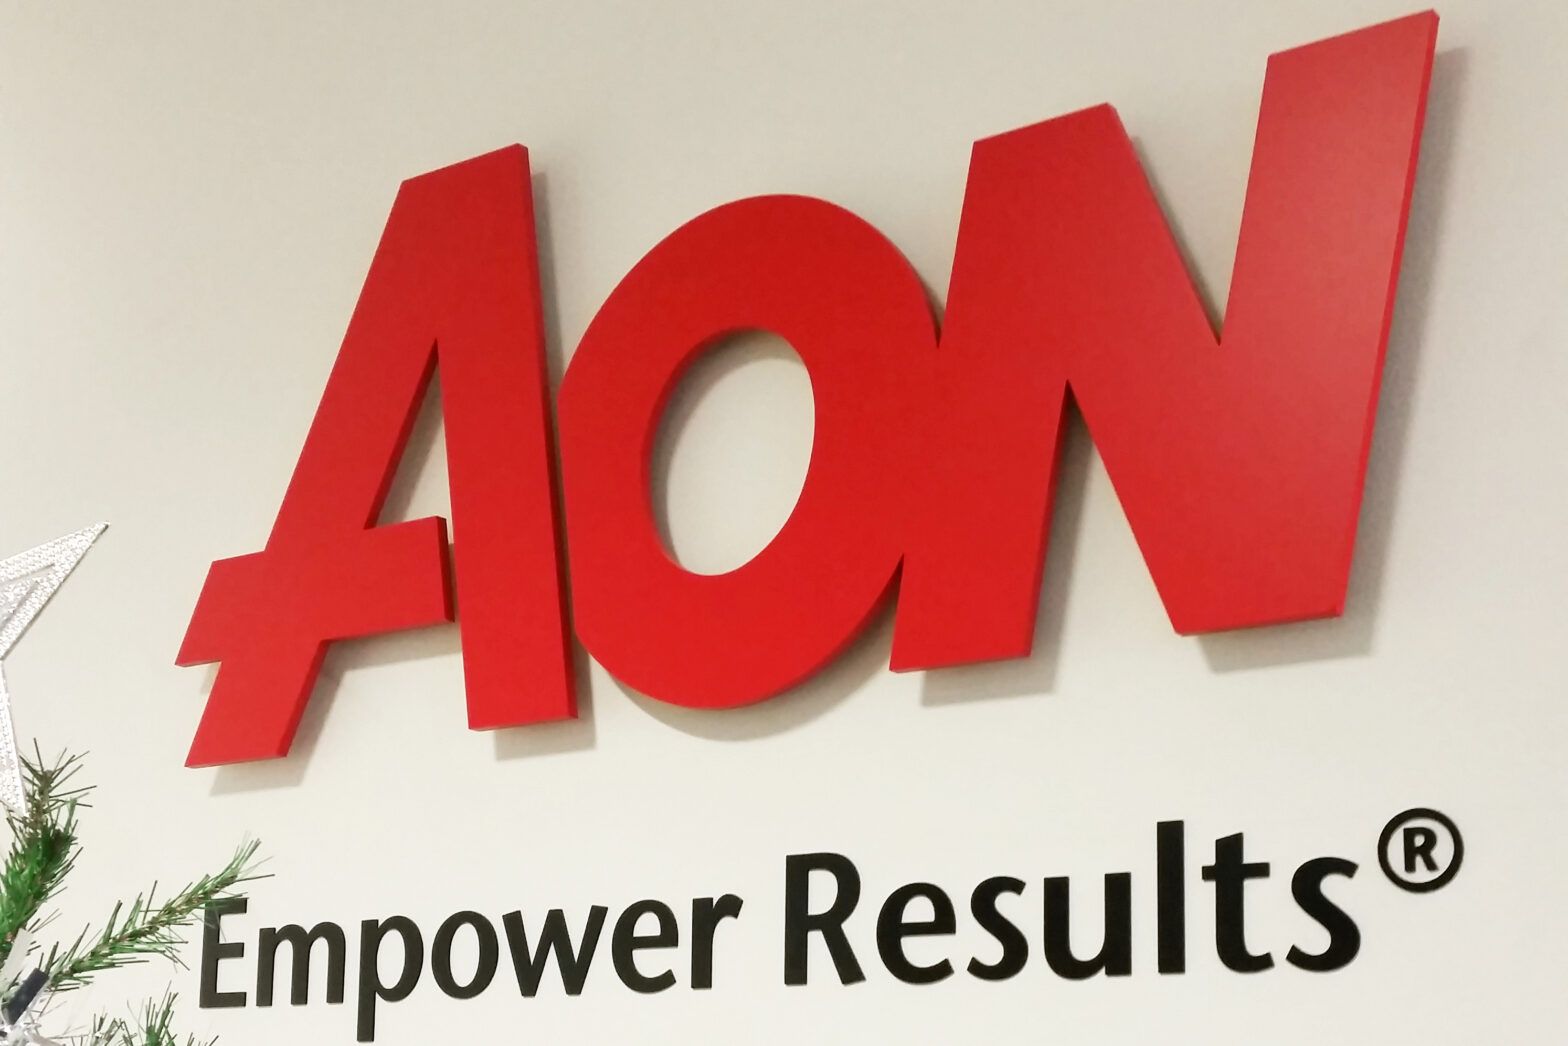 Aon to grade fund managers on ESG